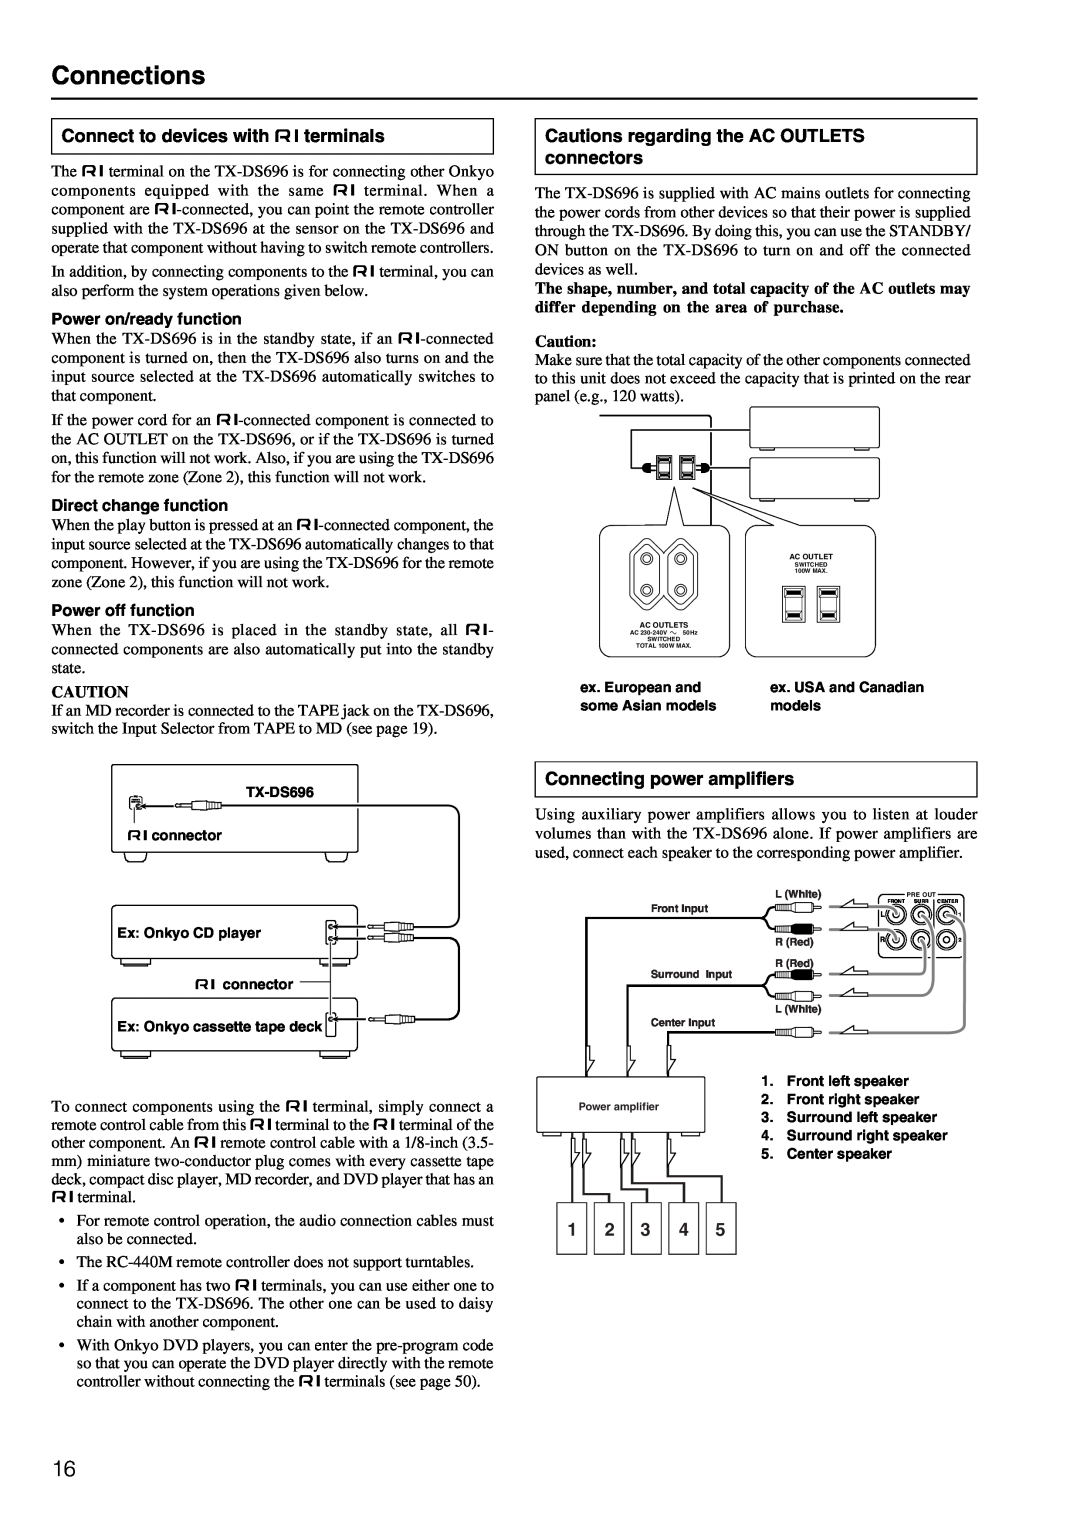 Onkyo TX-DS696 appendix Connections, Connect to devices with z terminals, Cautions regarding the AC OUTLETS connectors 